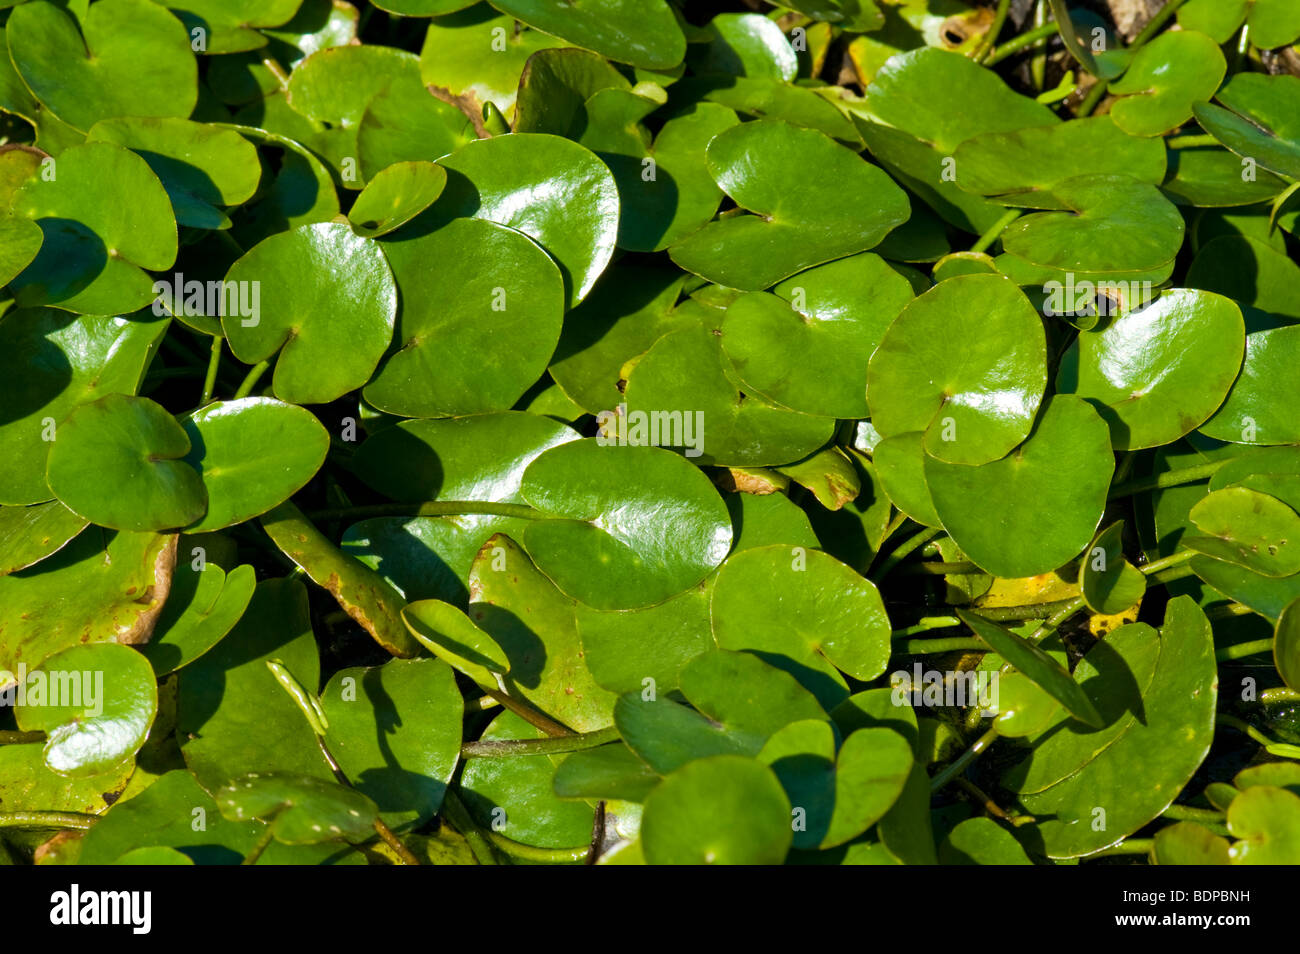 Nymphoides Peltata Yellow floating heart water waterplant plant green surface swim swimming cover covering pond lake garden seek Stock Photo